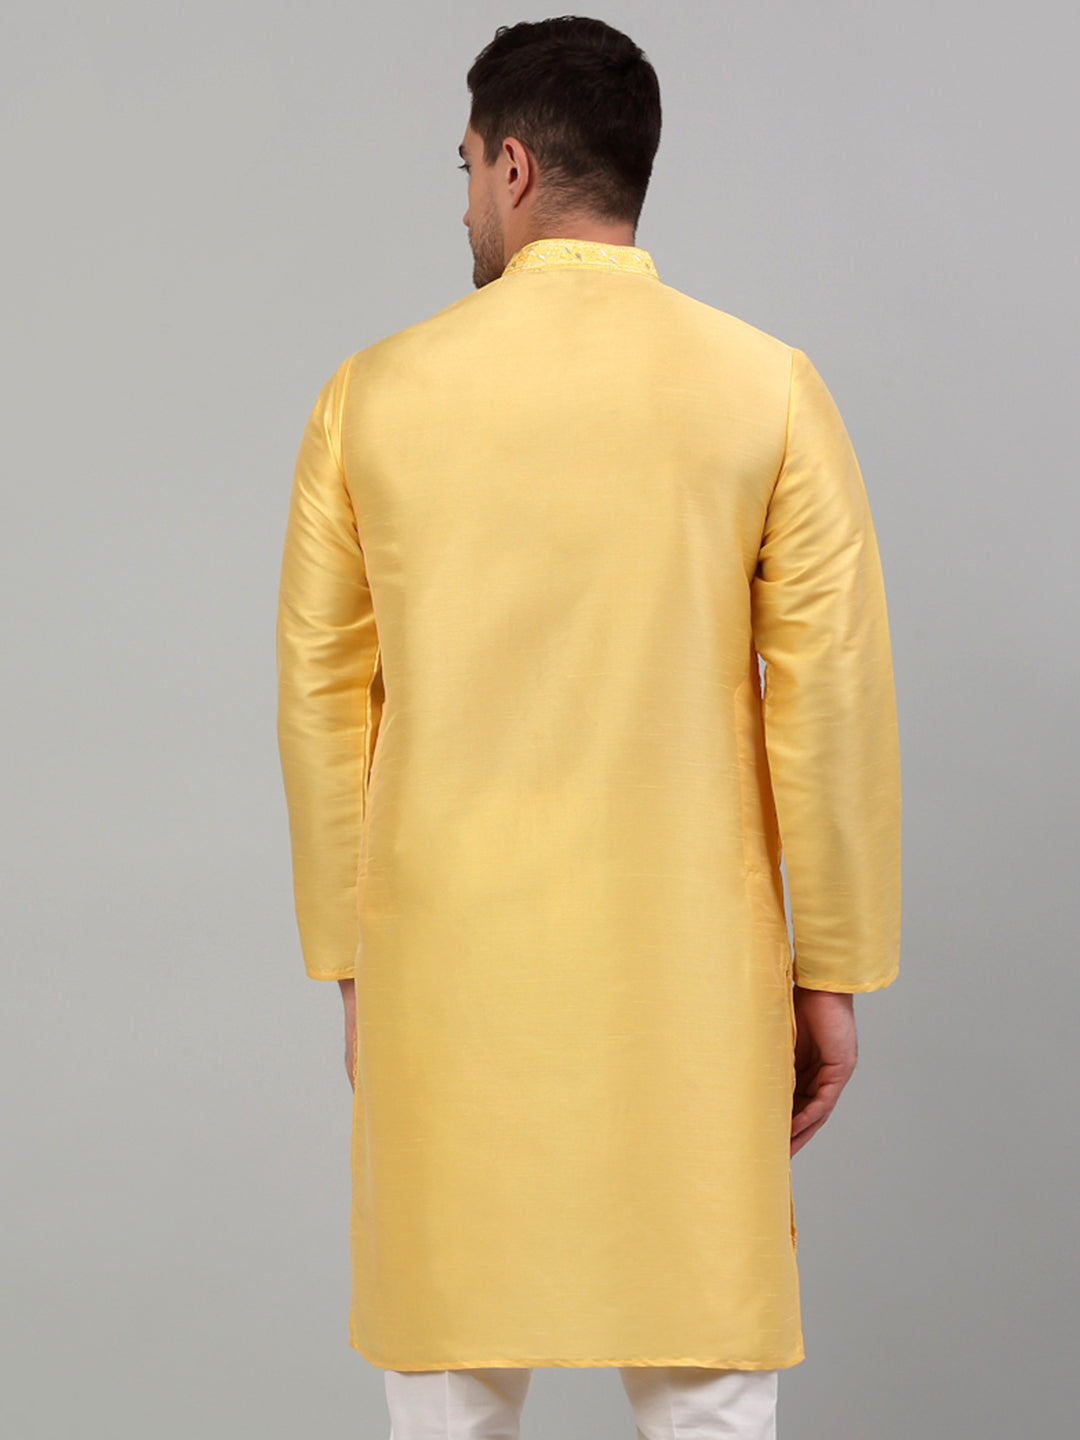 Men's Yellow Embroidered Kurta Only